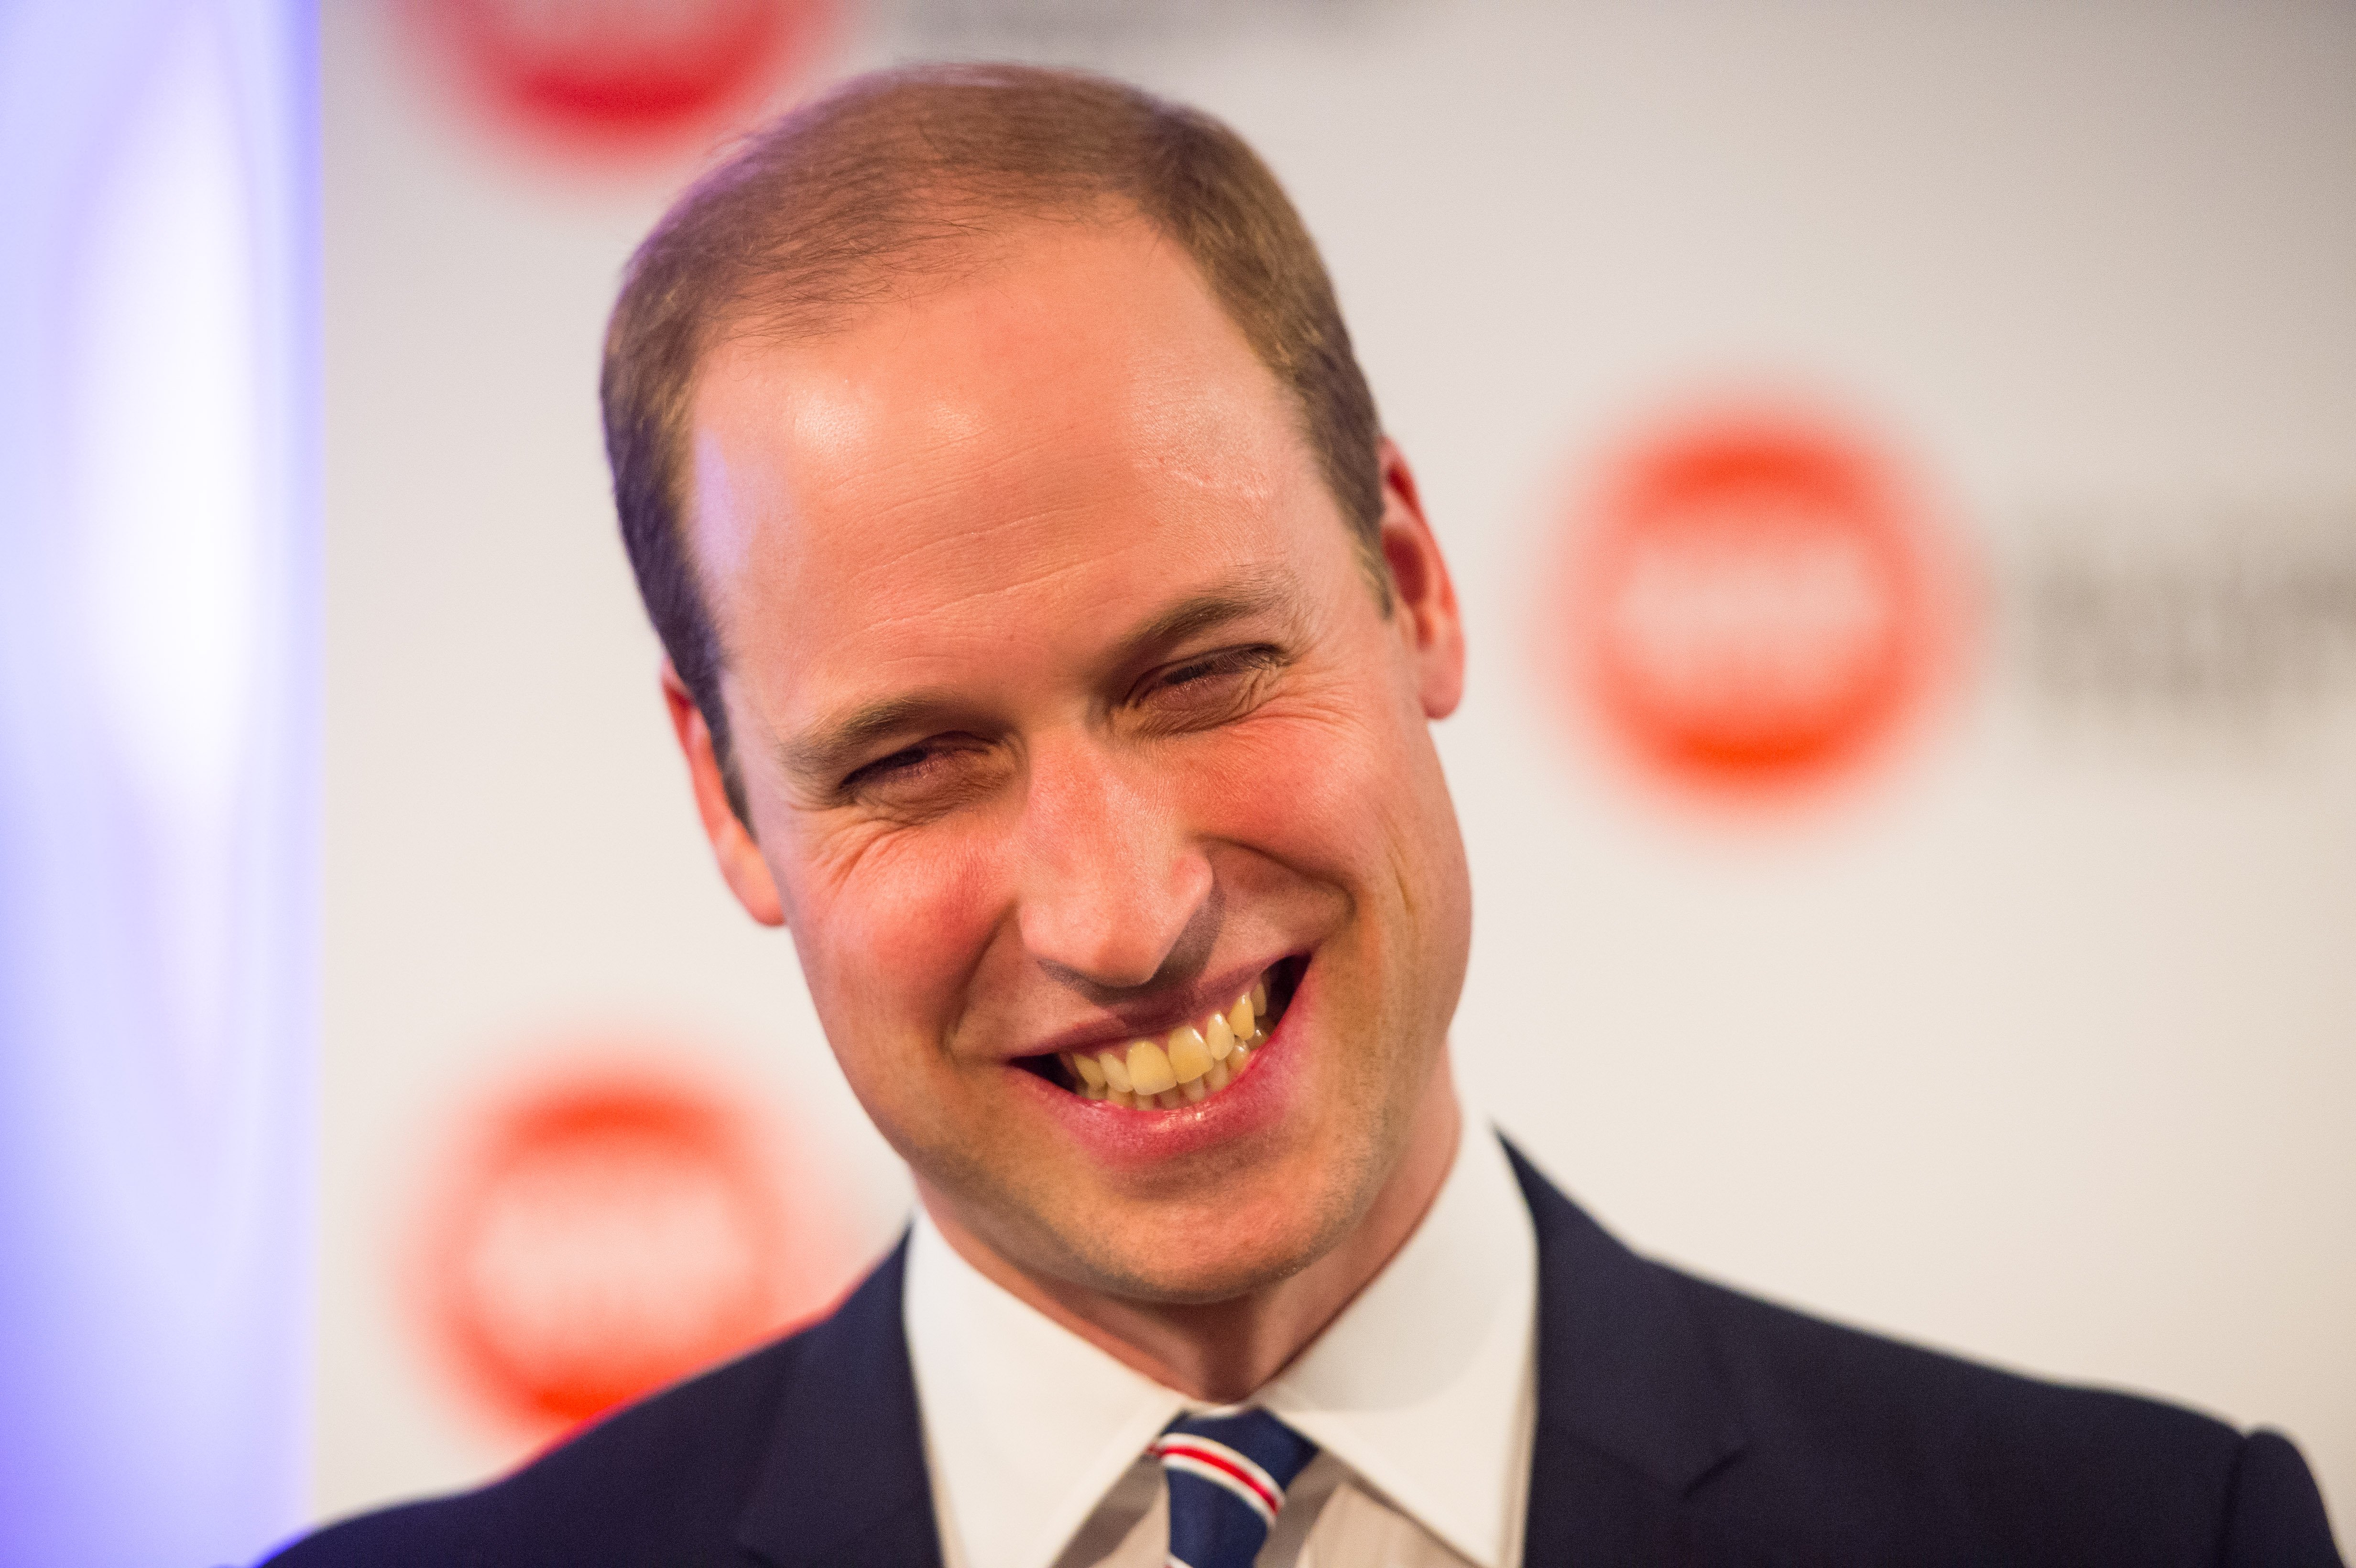 Prinz William am 19. November 2015 in London, England | Quelle: Getty Images 